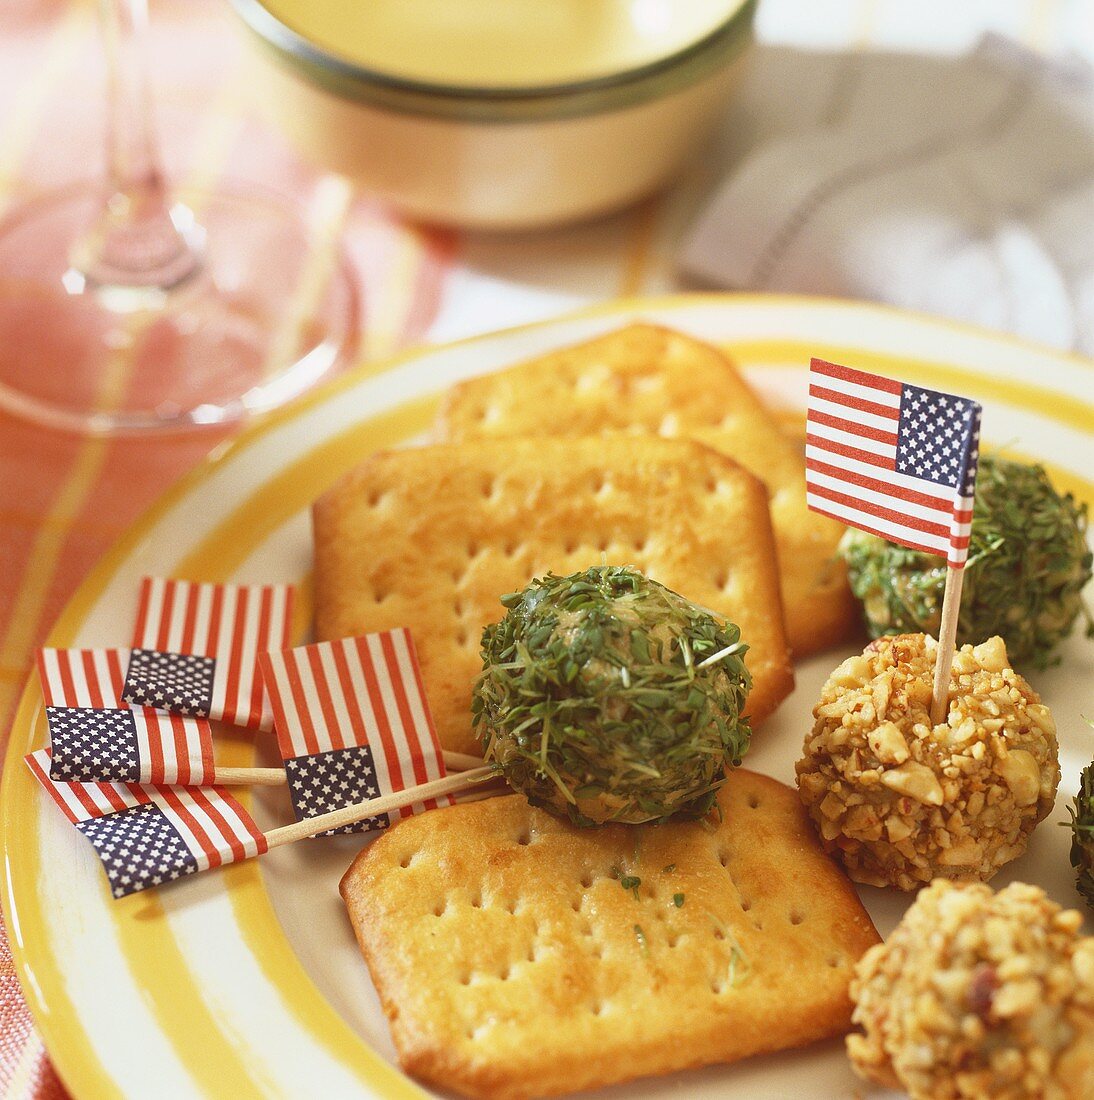 Crackers and cream cheese balls coated in nuts and herbs